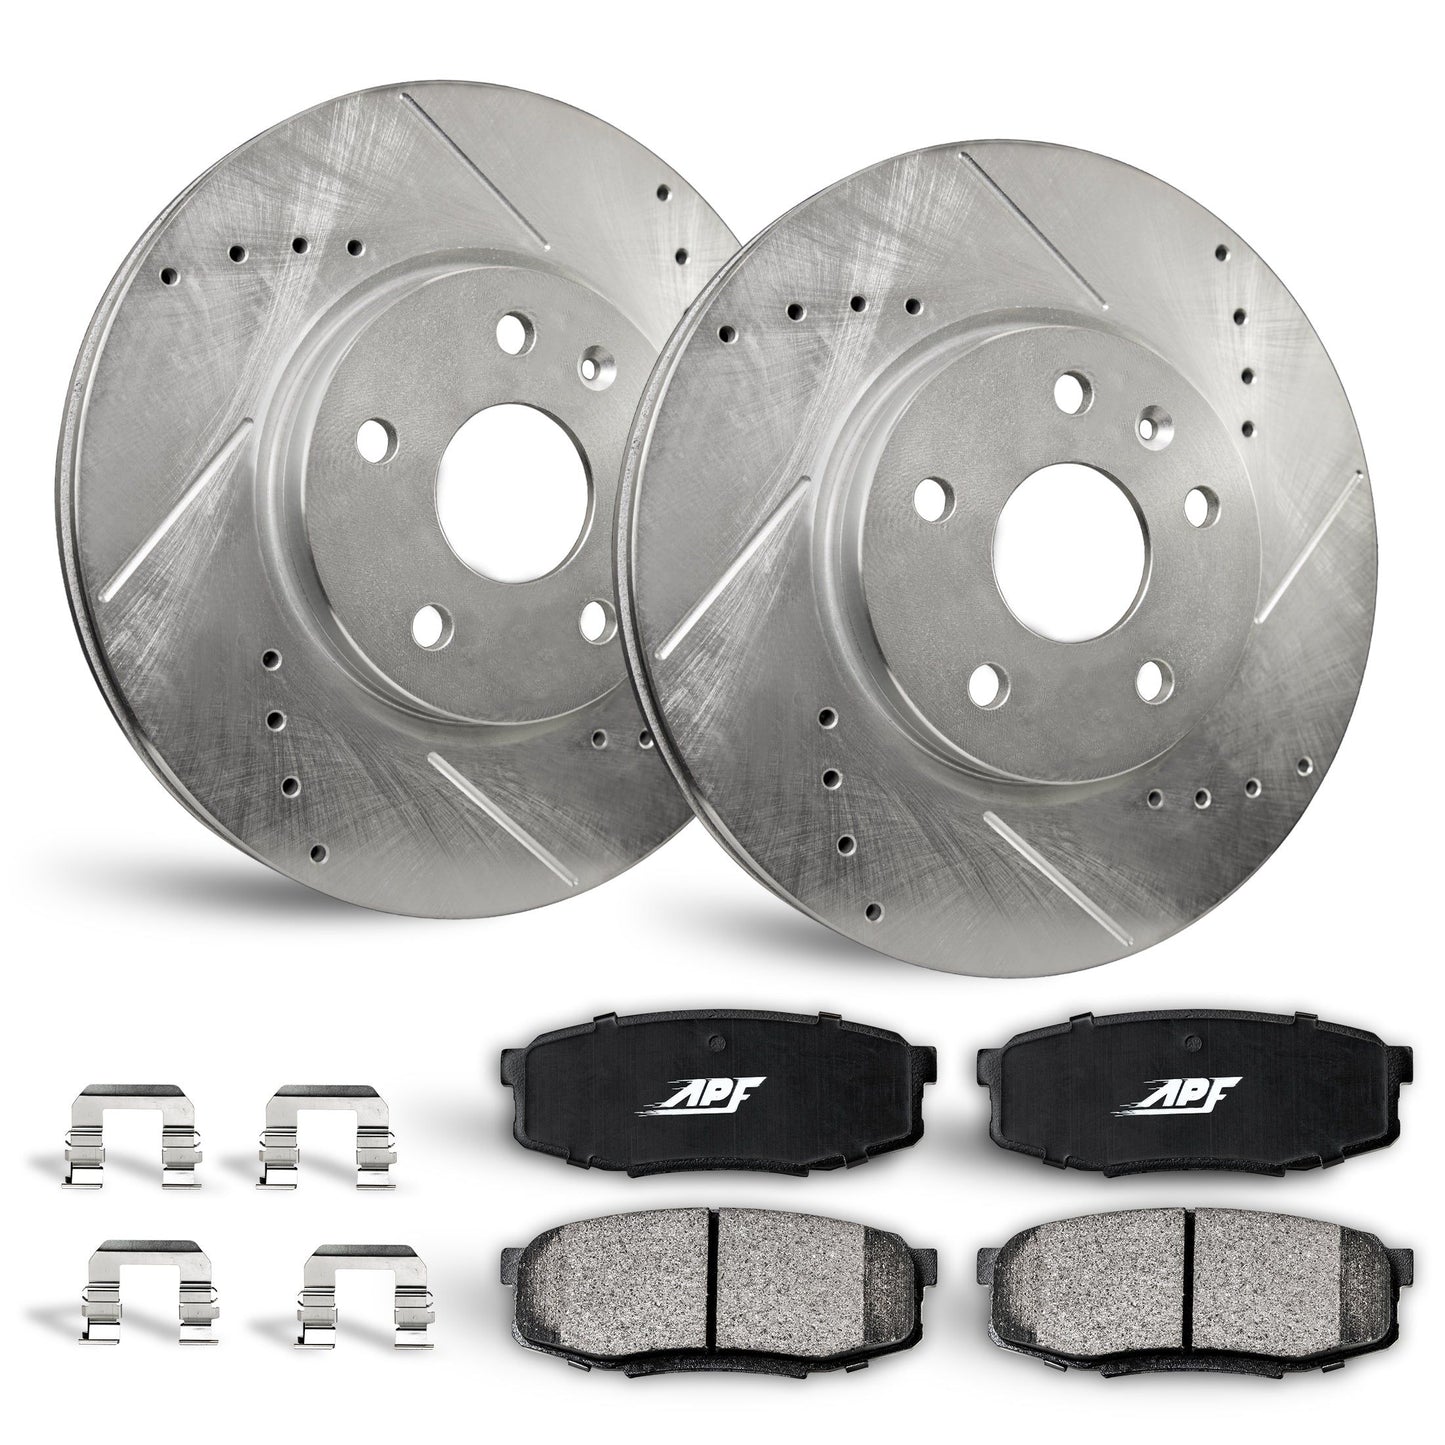 APF Front Brake Kit compatible with Acura ILX Hybrid 2013-2015 | Zinc Drilled Slotted Rotors with Ceramic Carbon Fiber Brake Pads